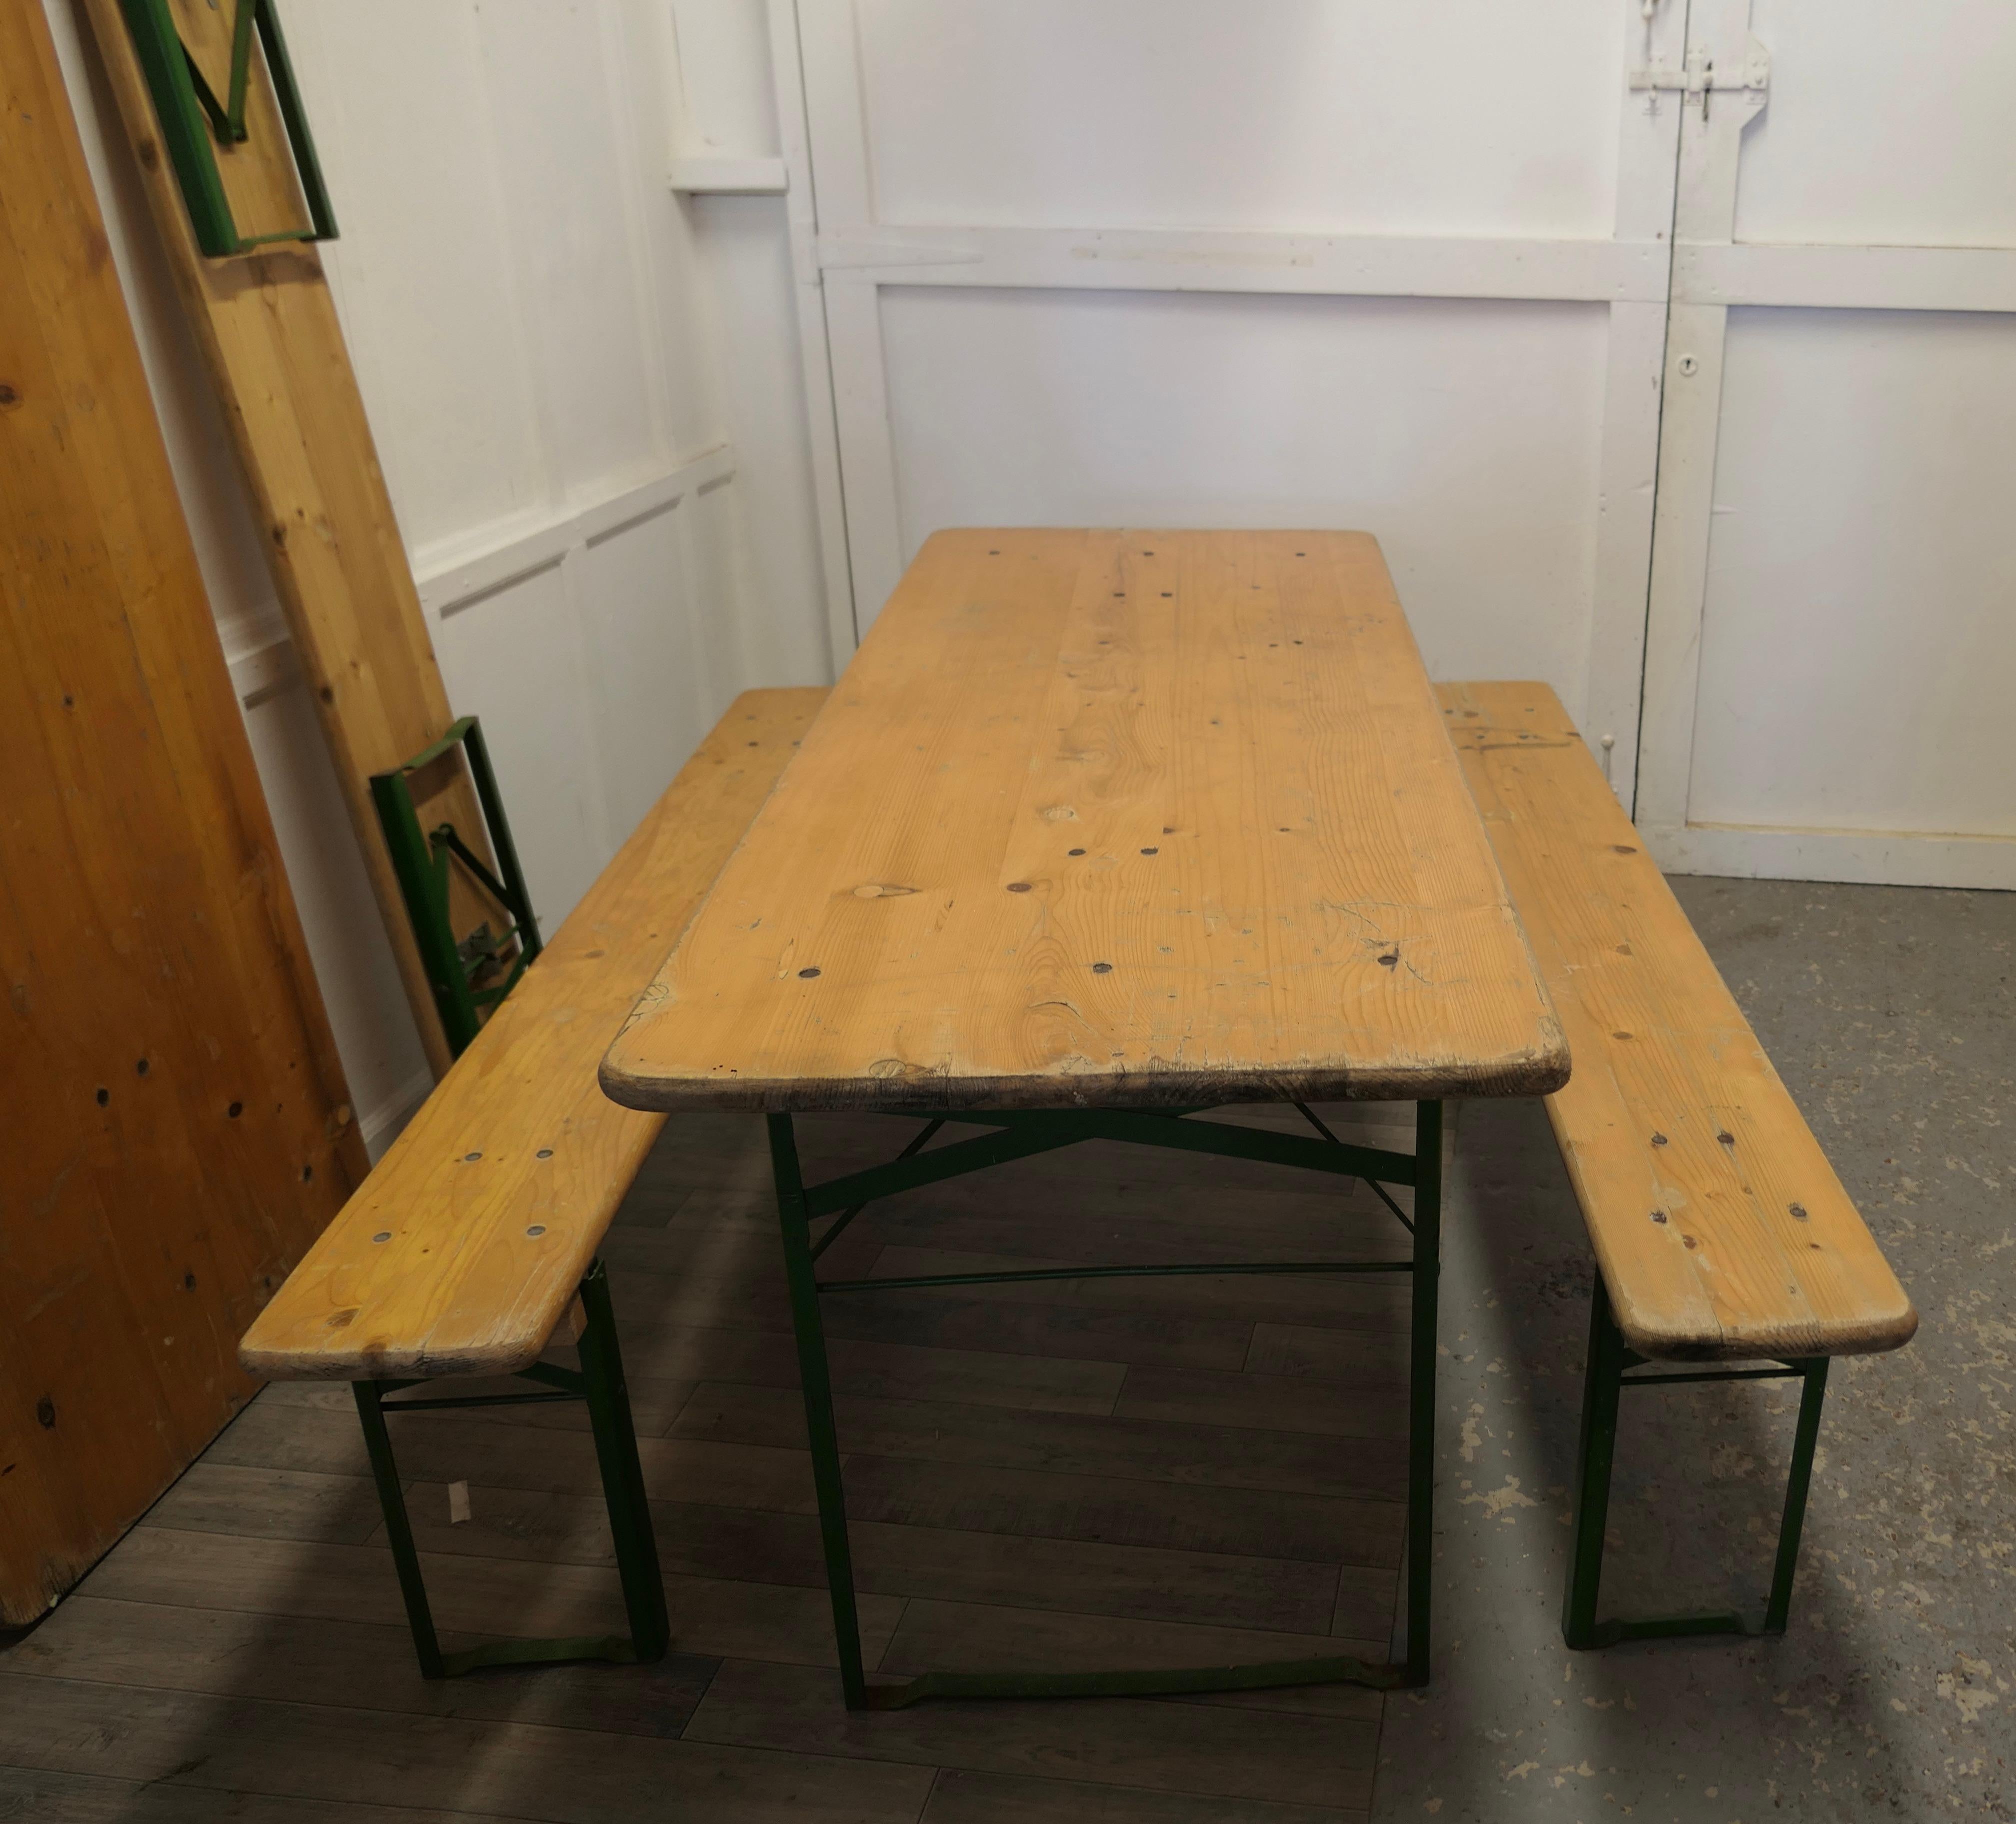 Set of 6ft Pine Picnic Table and Benches We Have 2 of These Available In Good Condition For Sale In Chillerton, Isle of Wight